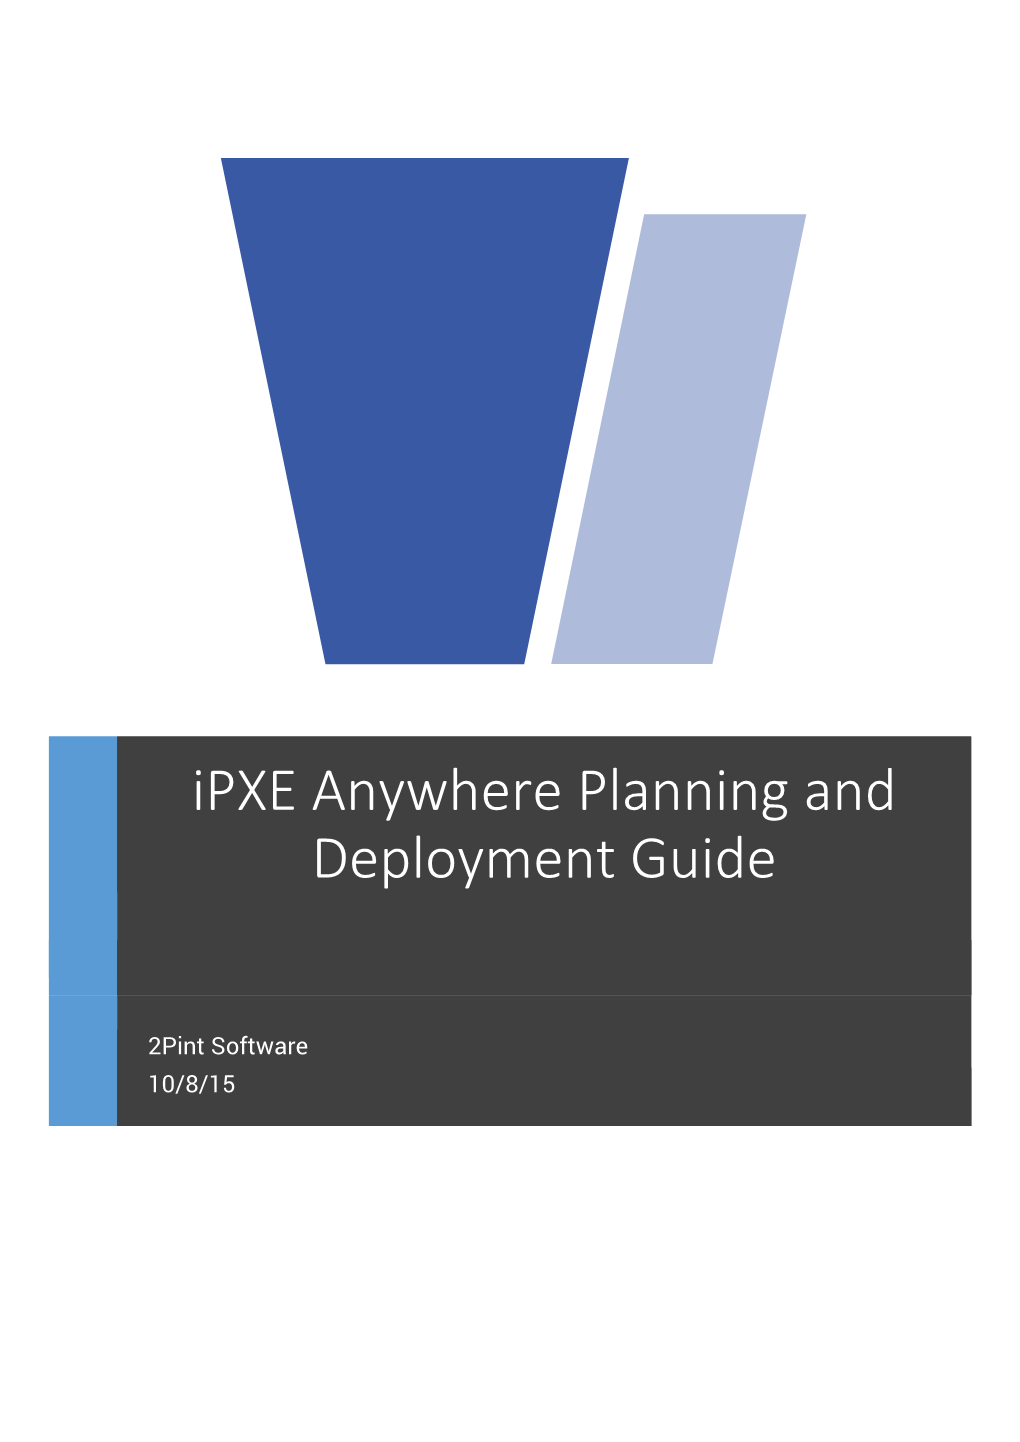 Ipxe Anywhere Planning and Deployment Guide